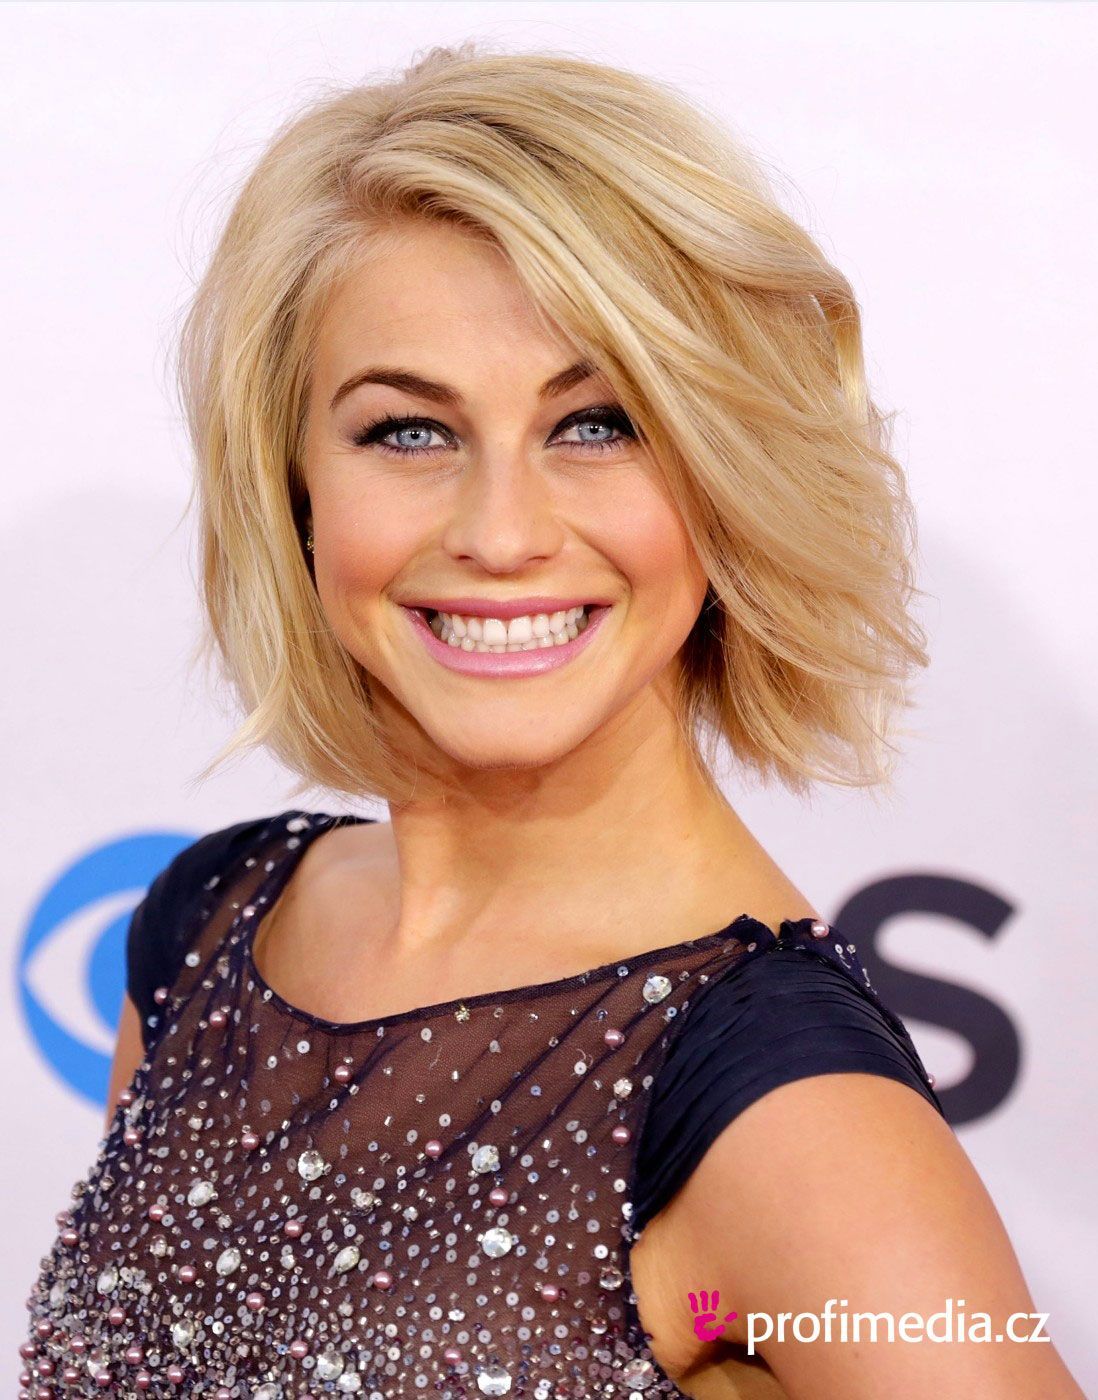 Julianne Hough- loved her in Safe Haven and love her hair! After wedding hair cu